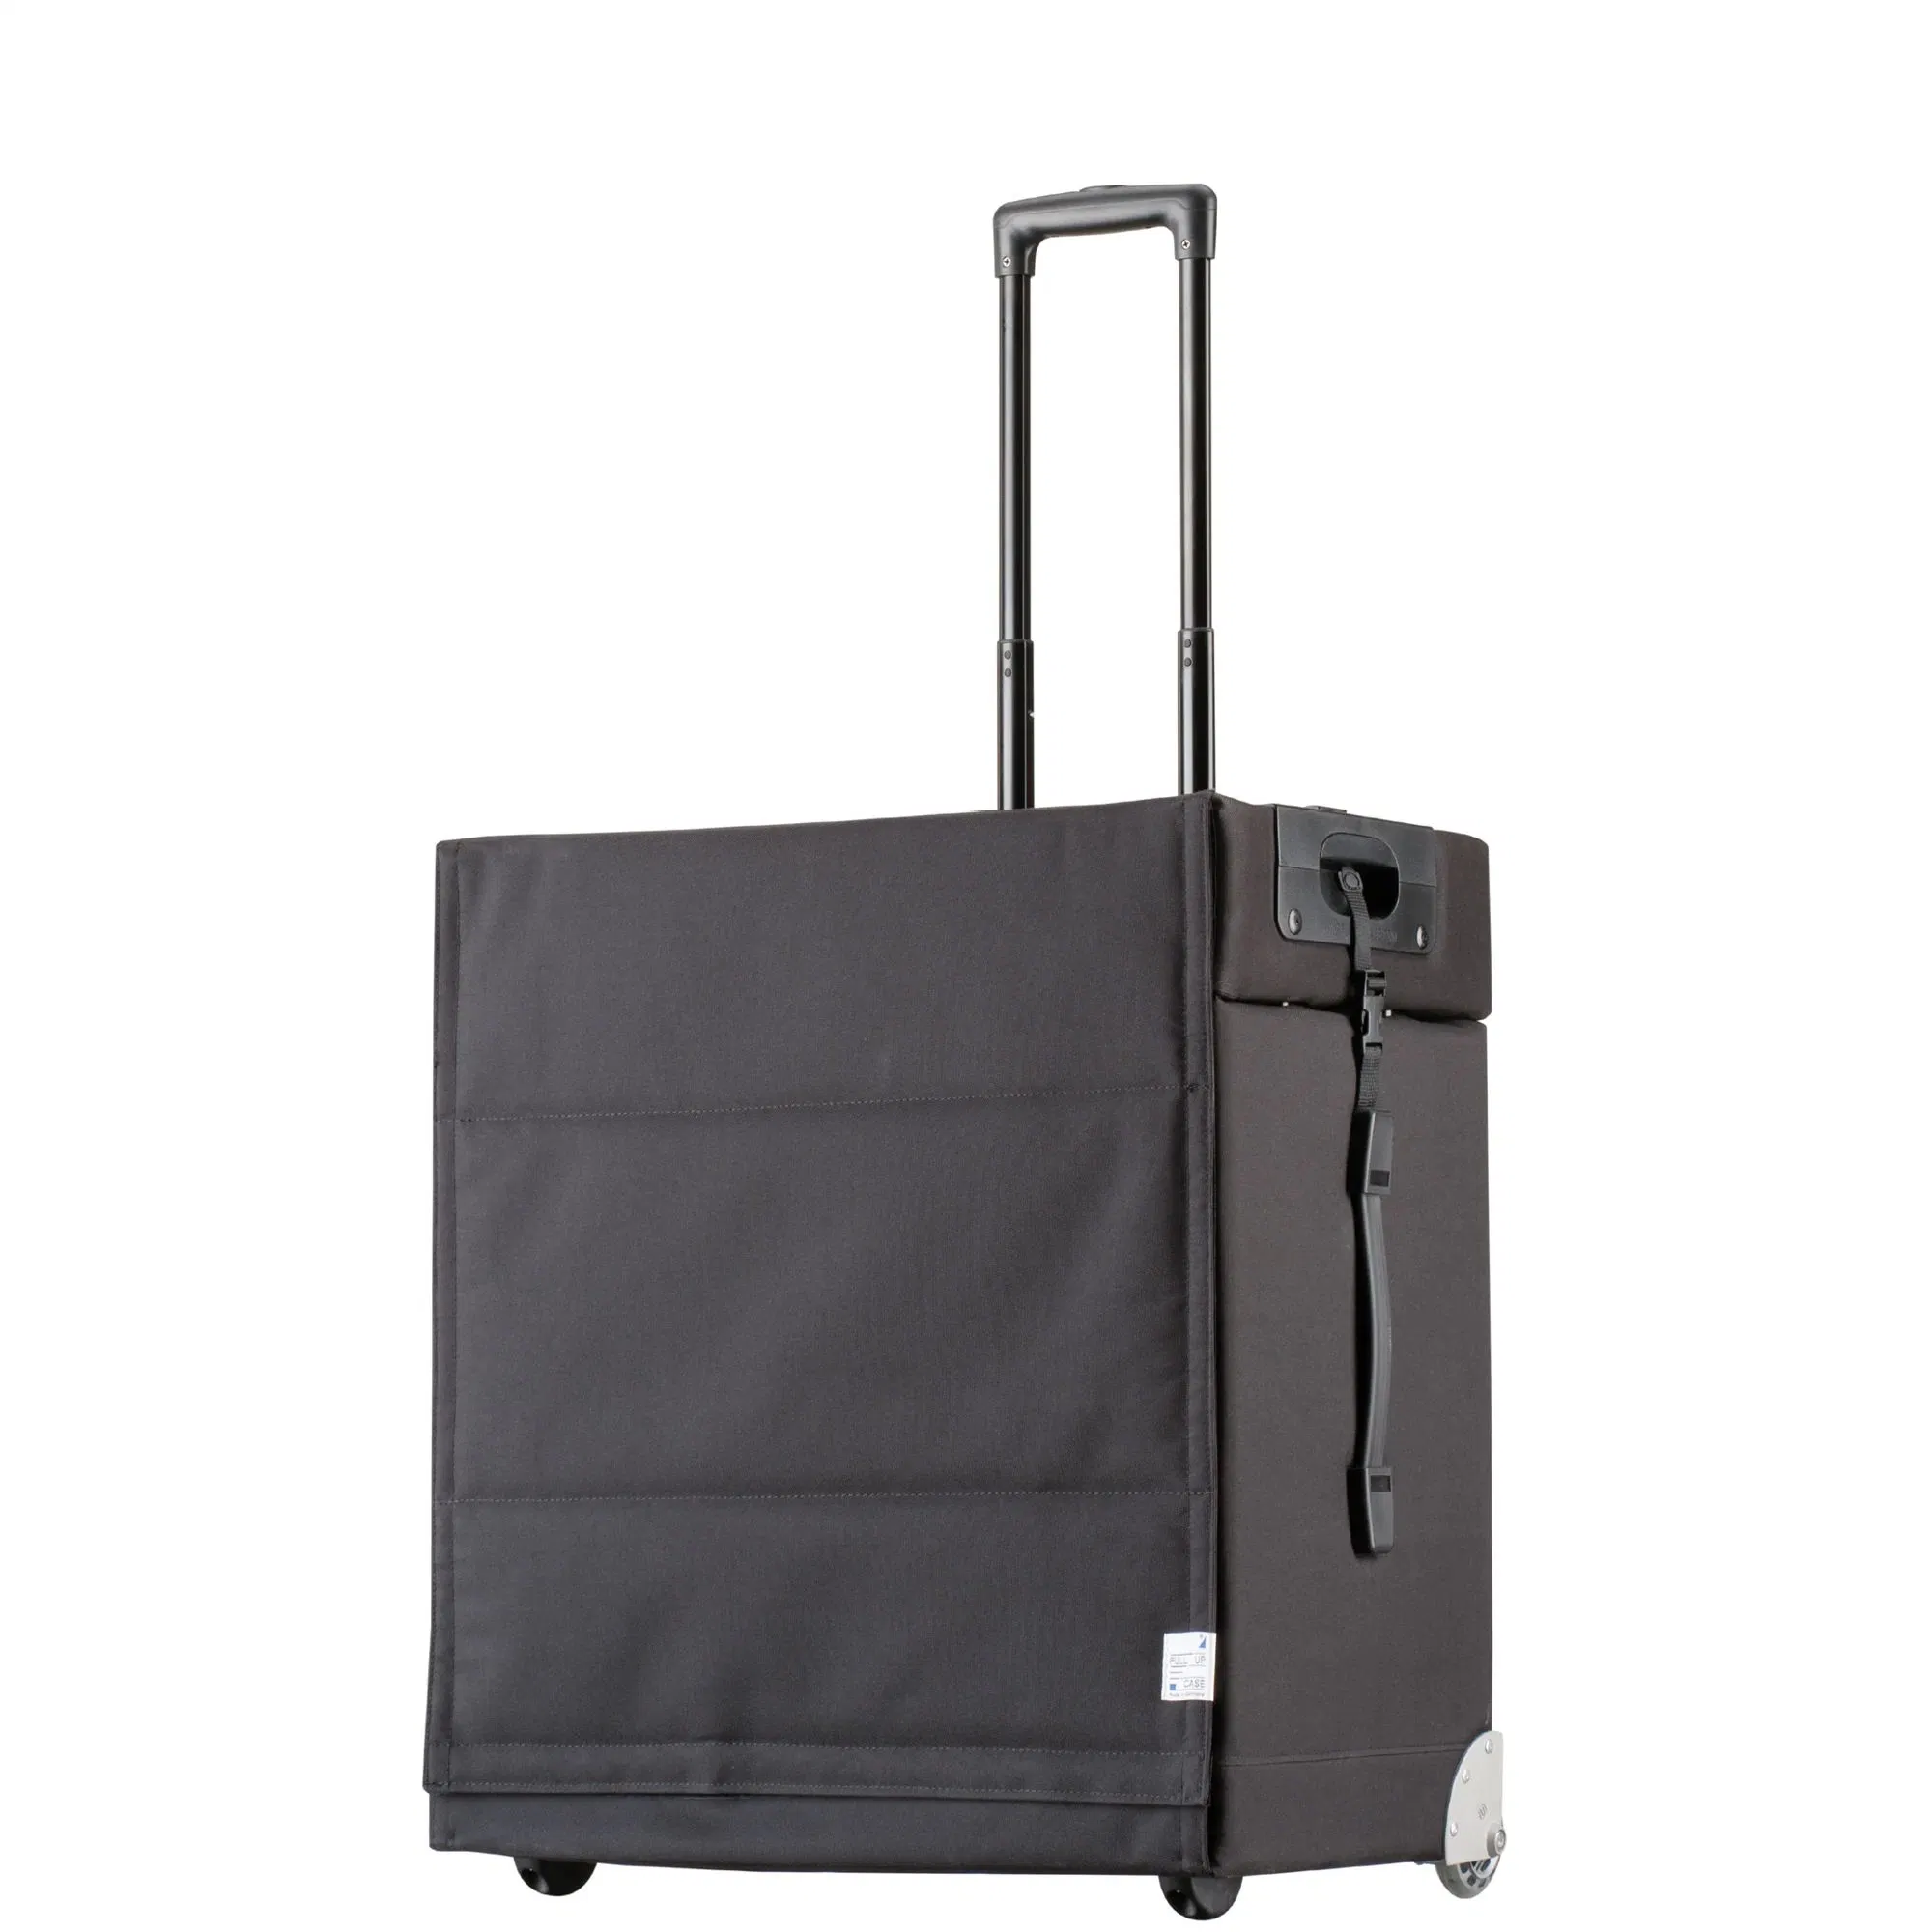 Pull-up-Case AV-324 Sample Avantgarde Luggage Bag Hot Fashion Easy Taking Glasses Bags Sample Bag Display Cases Made in Germany Best Way for Business Travelcase